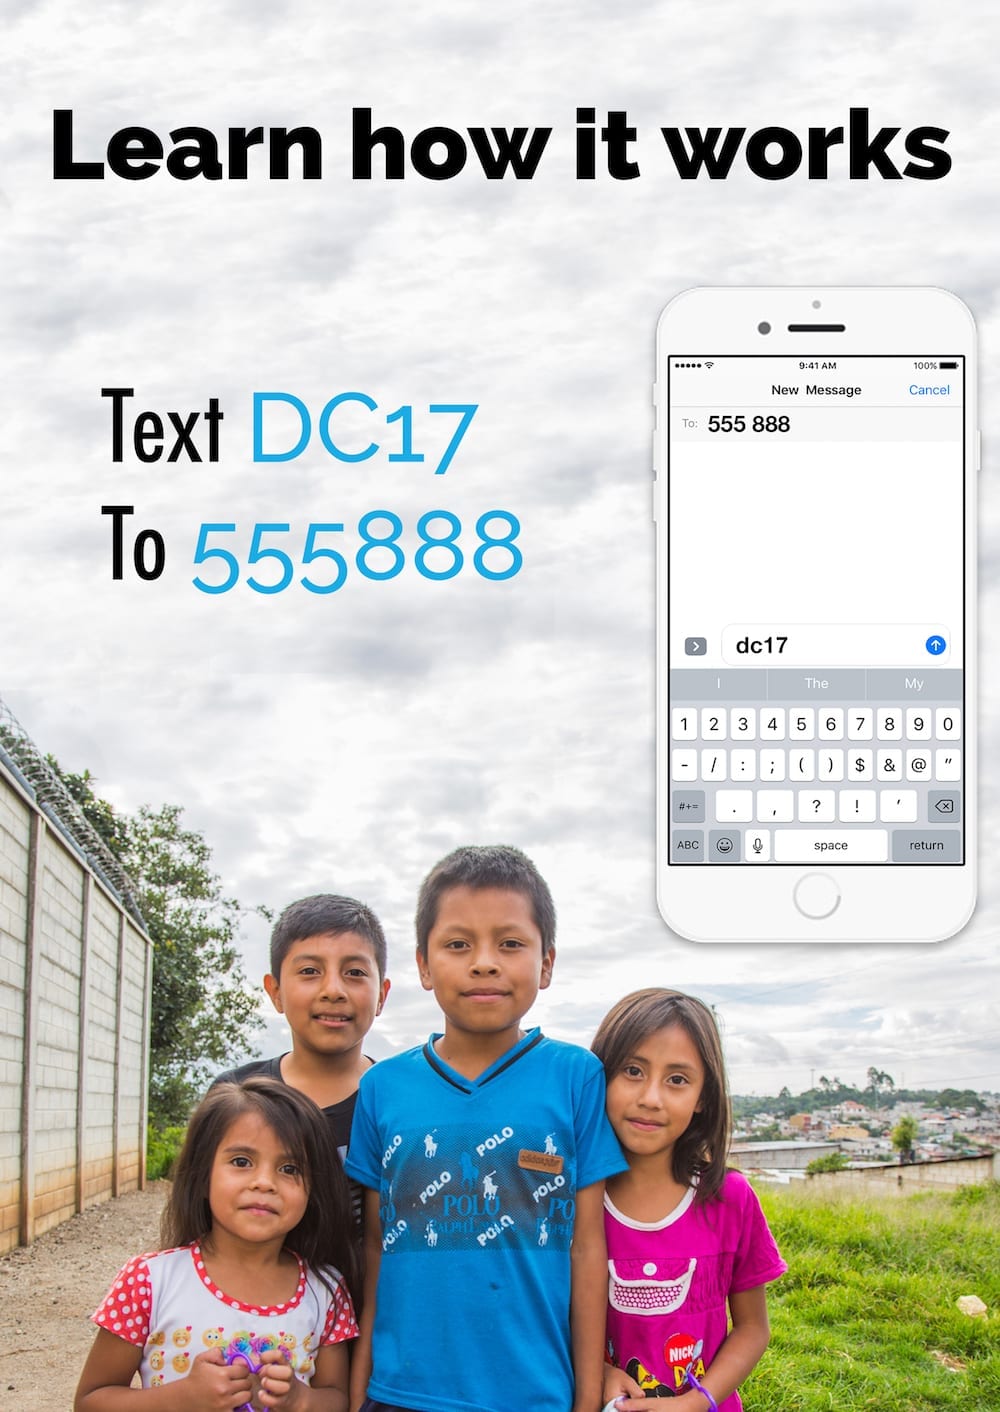 Yuda Bands call-to-action poster showing 4 little kids, a smartphone illustration, and the words "Text DC17 to 555888"